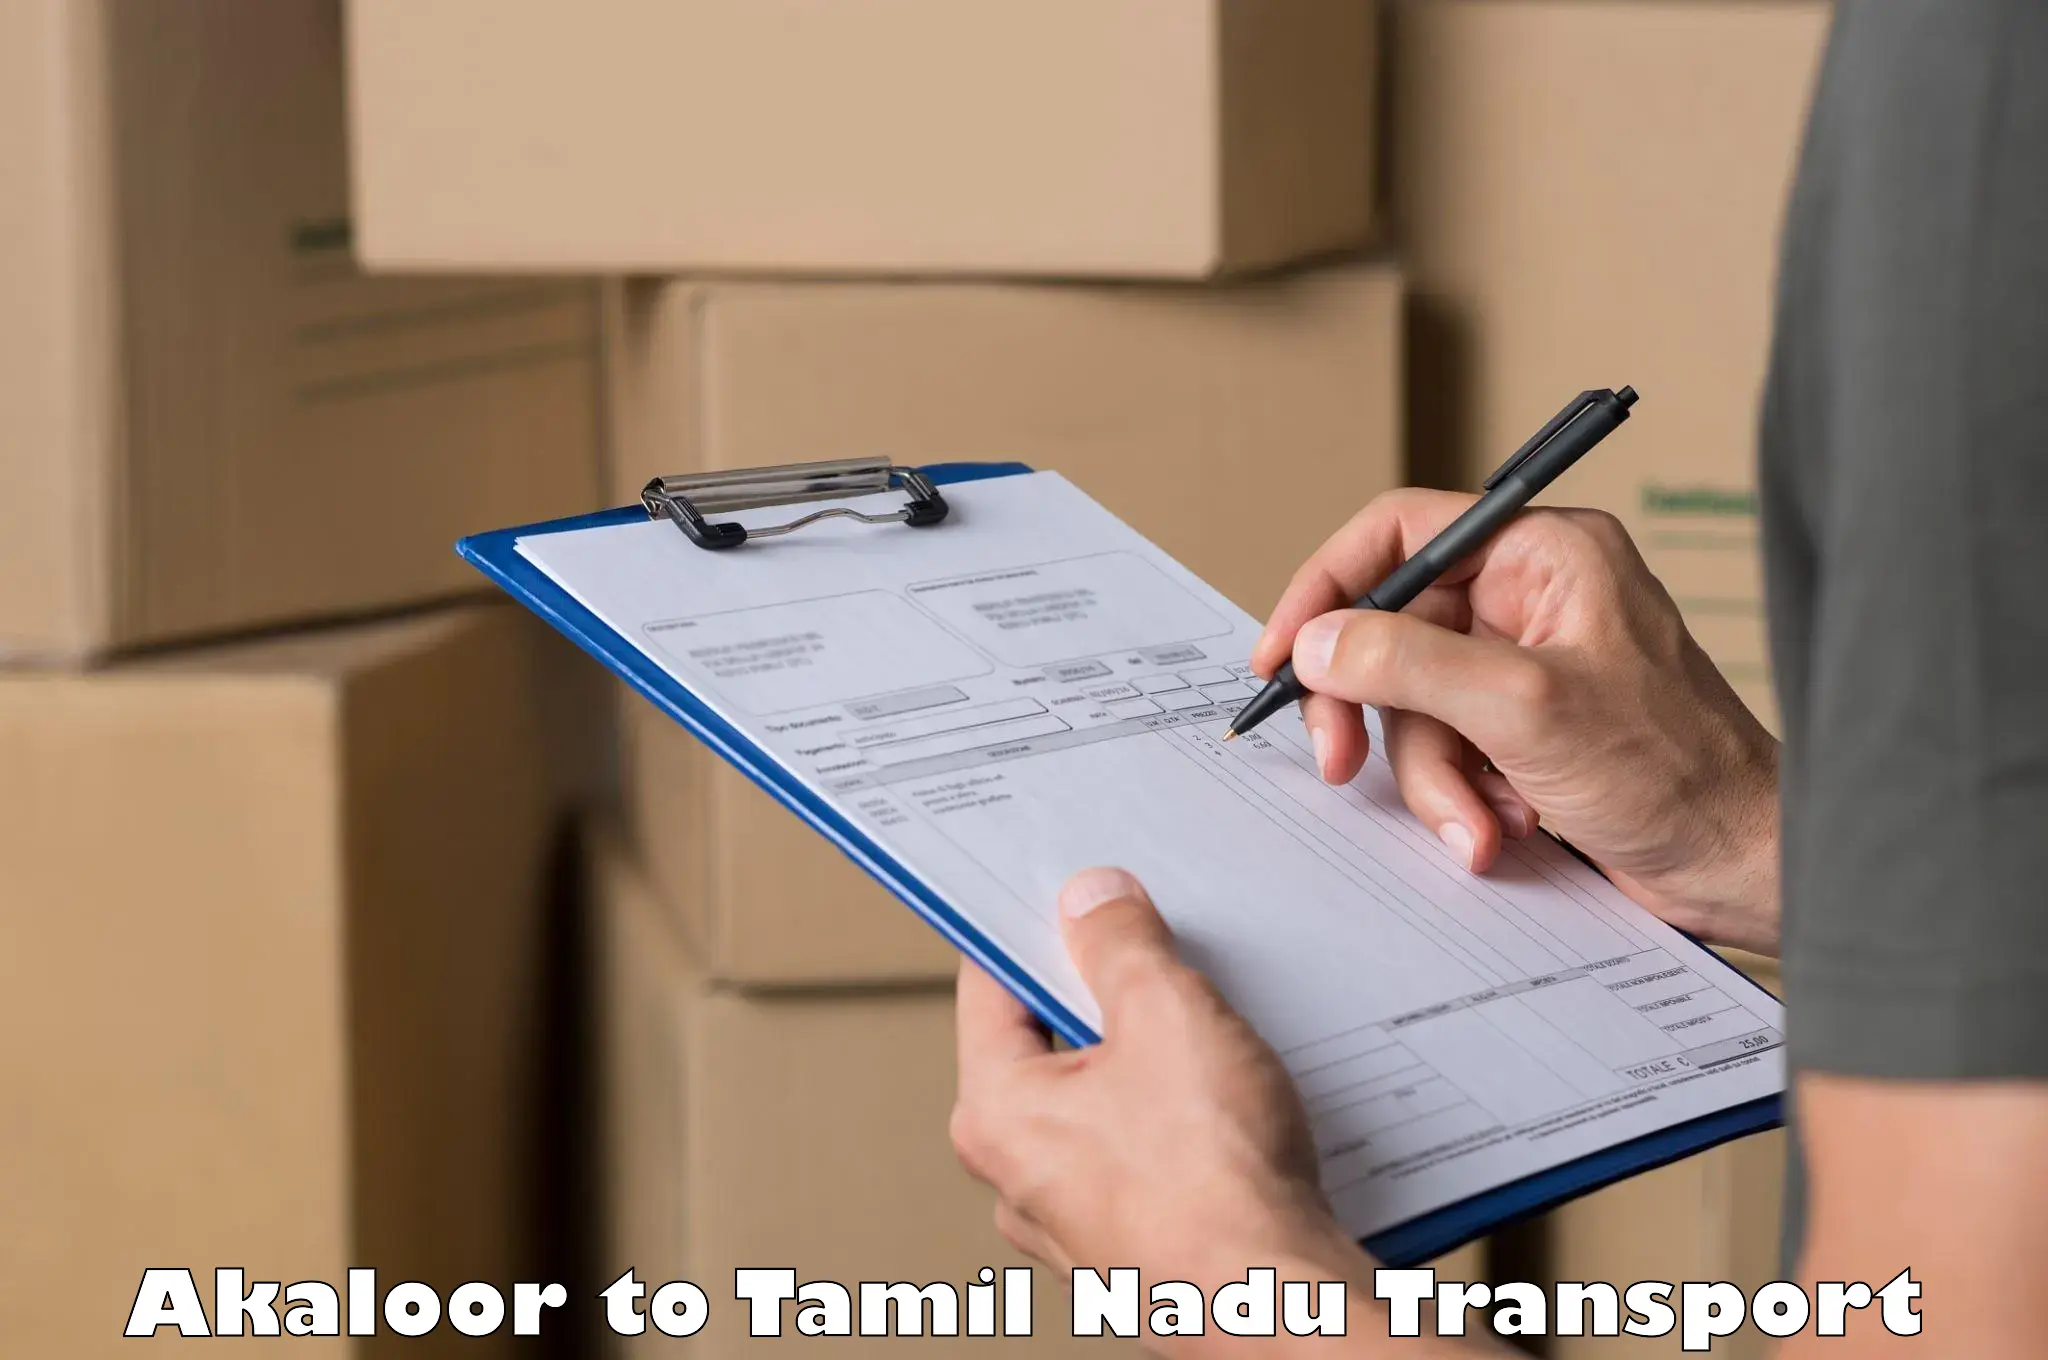 Transport shared services Akaloor to Cuddalore